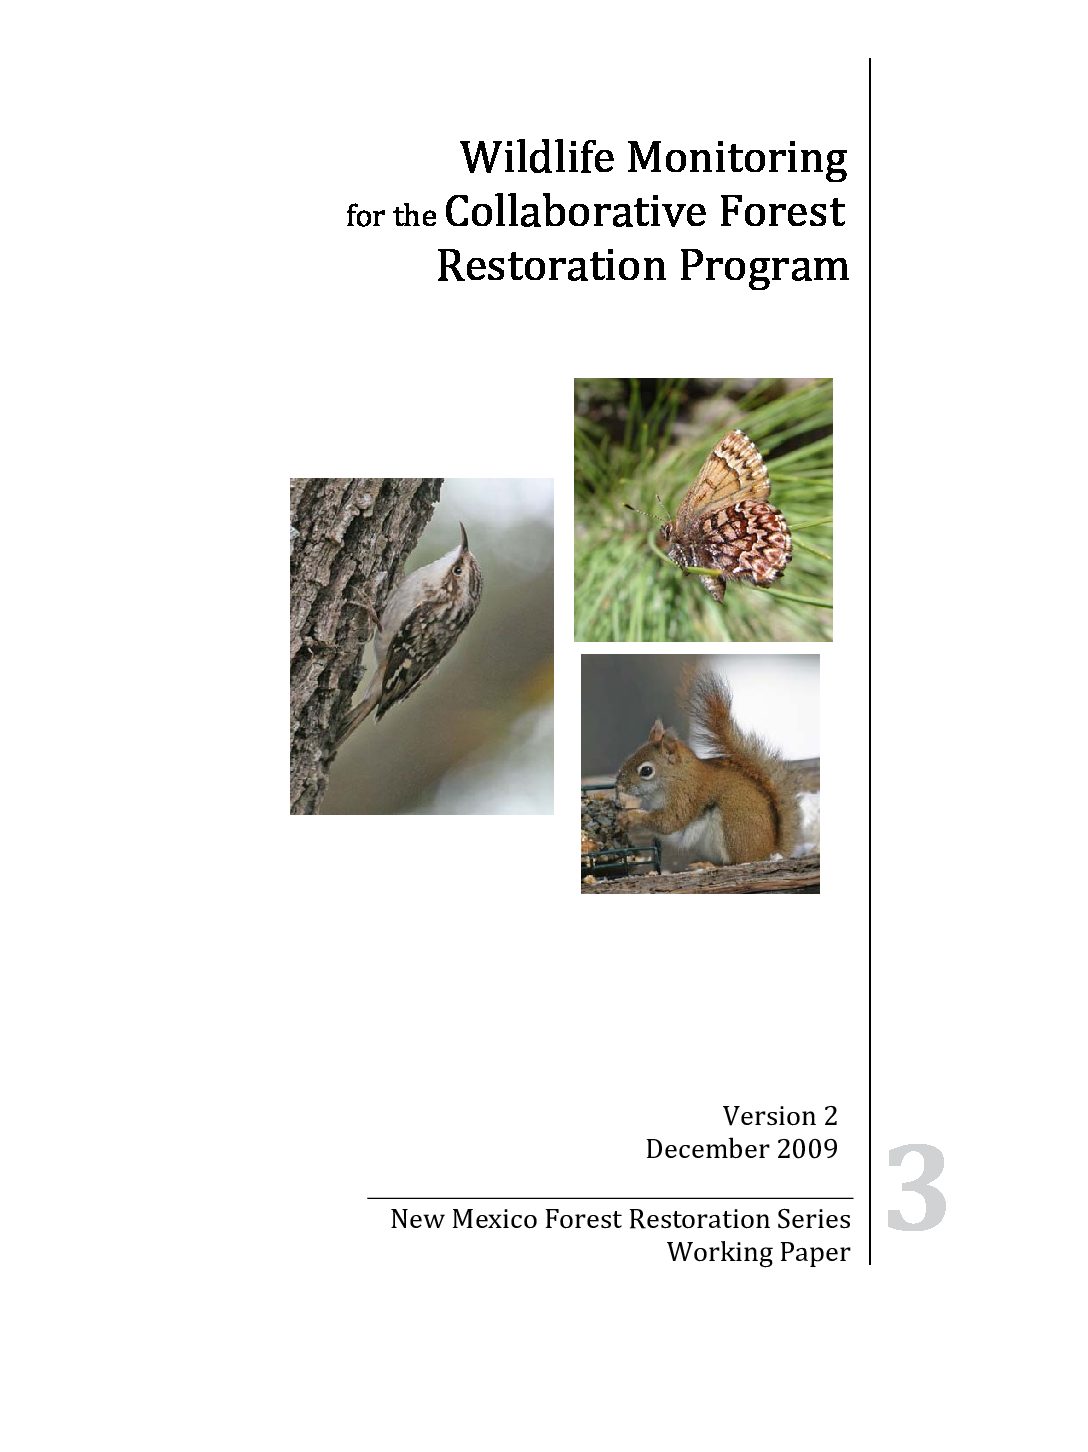 Wildlife Monitoring for the Collaborative Forest Restoration Program